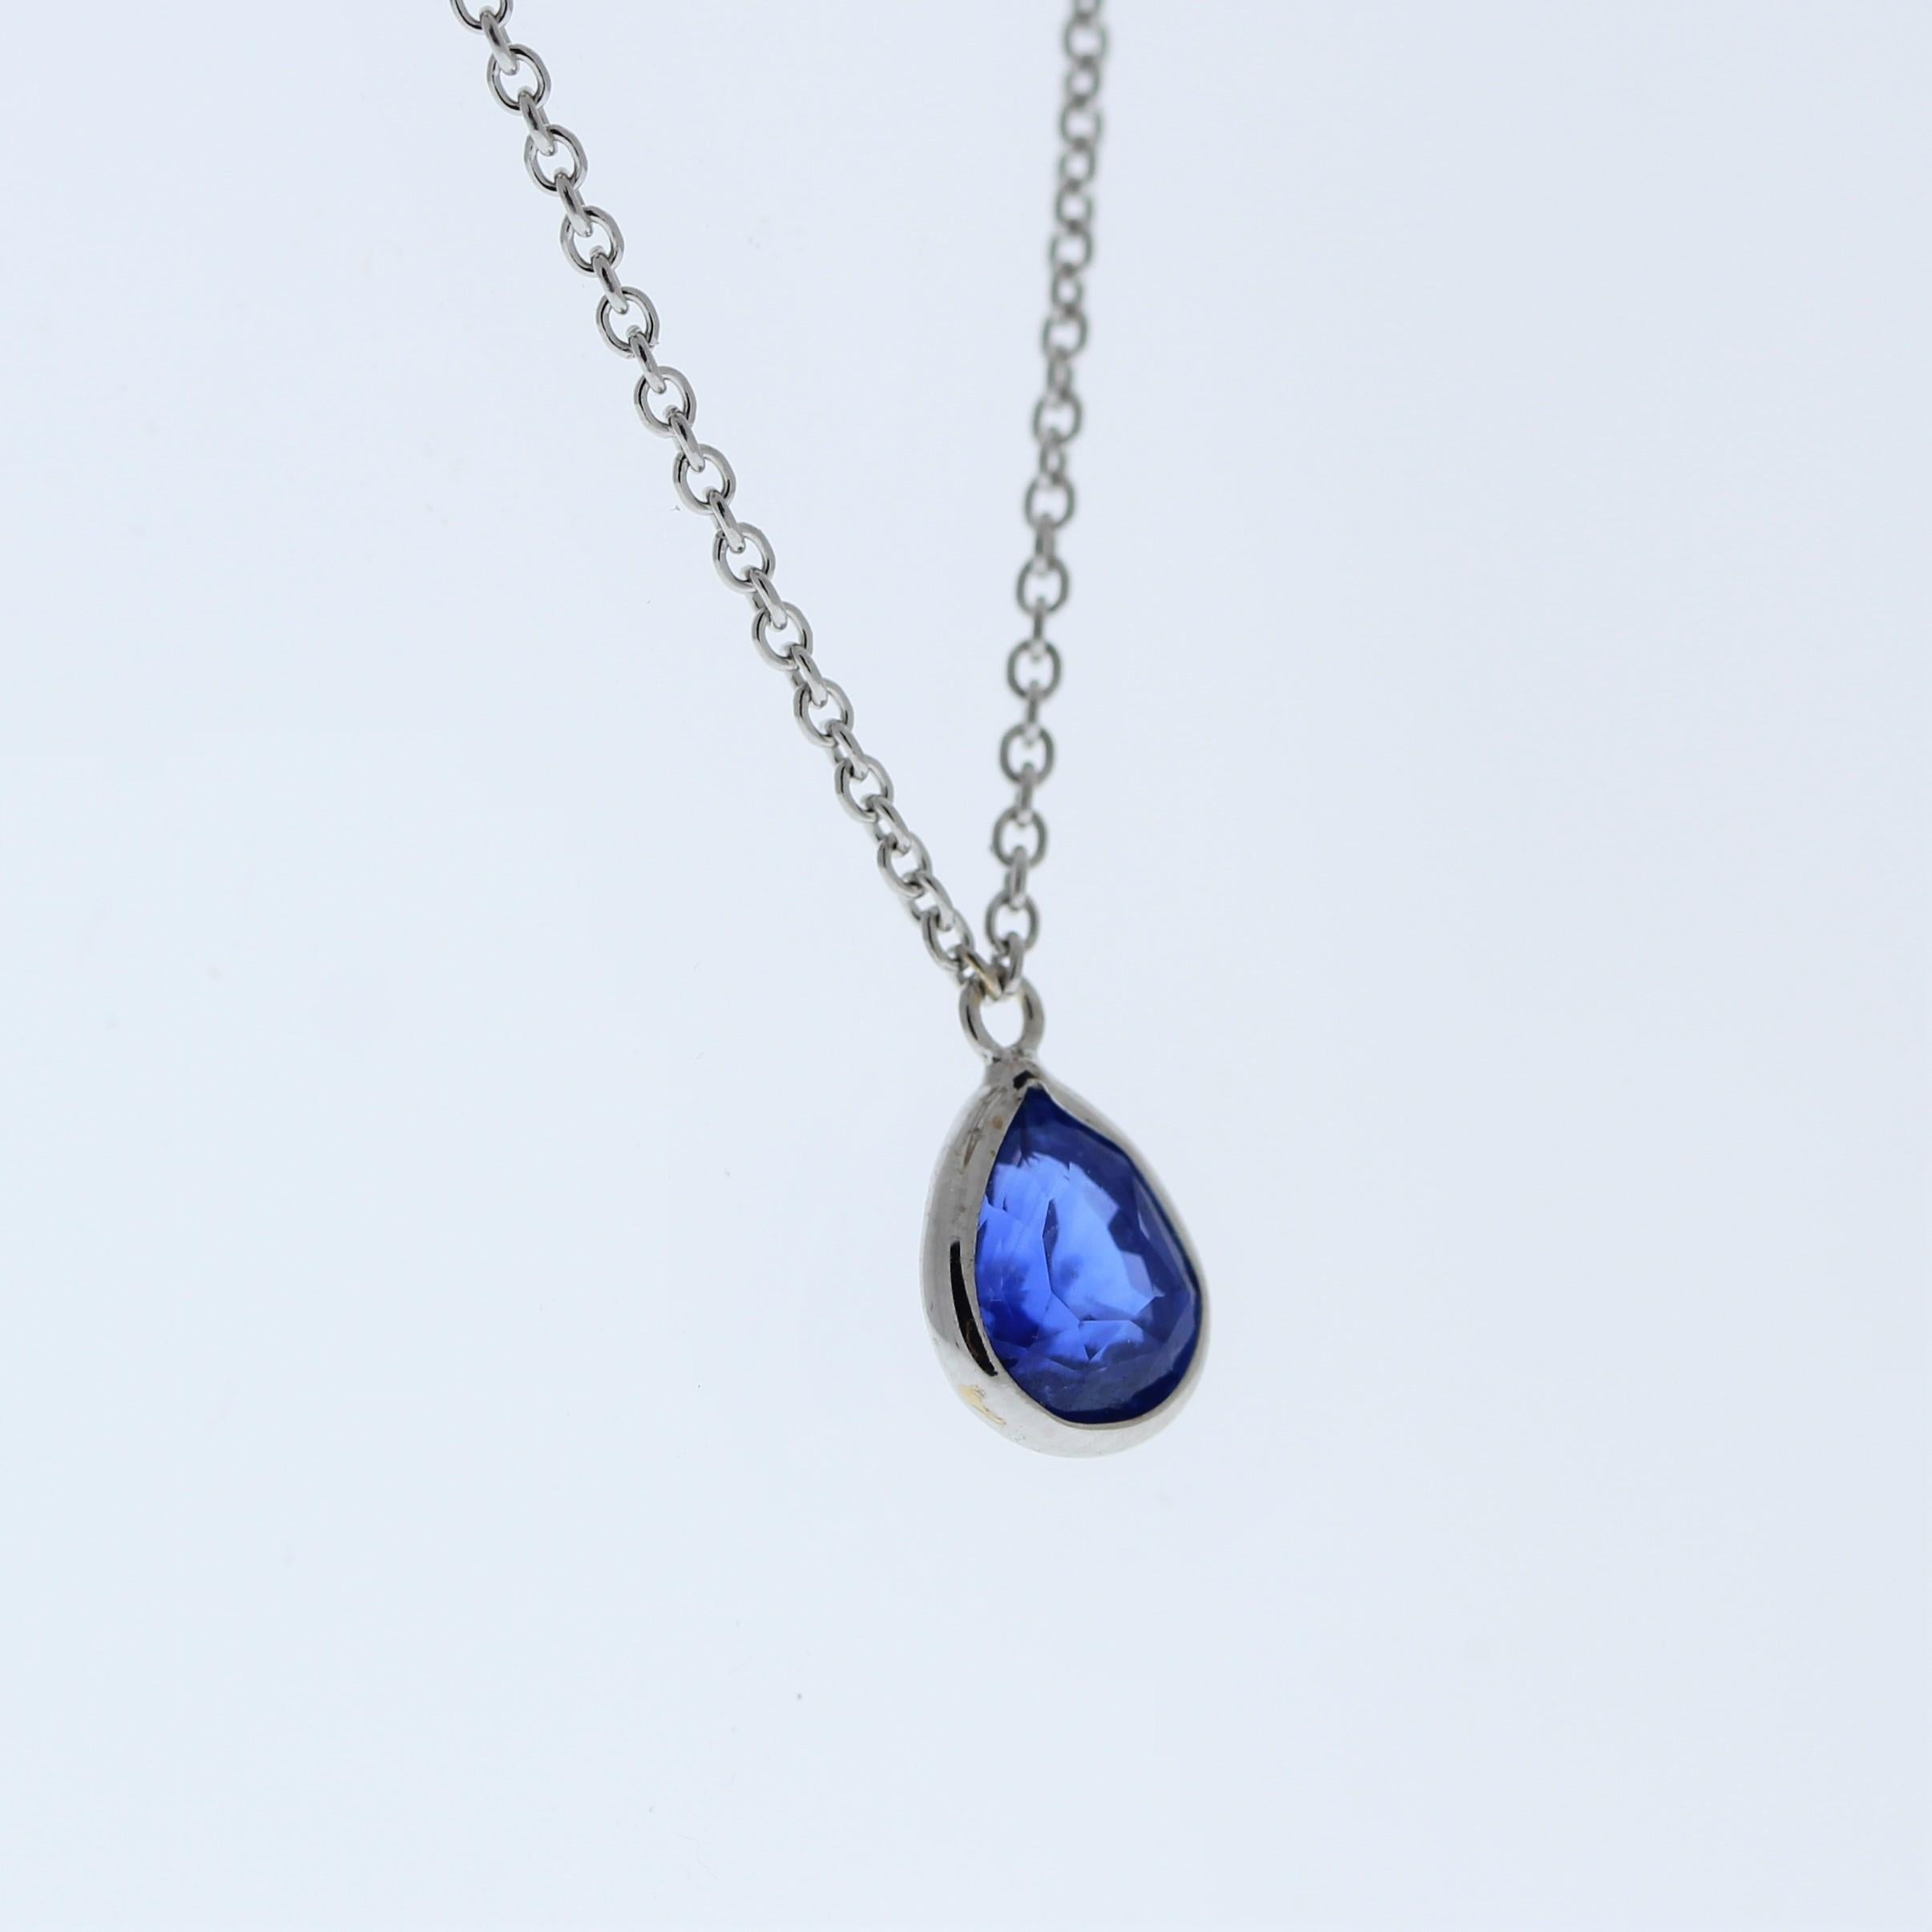 The necklace features a 1.49-carat pear-cut blue sapphire set in a 14 karat white gold pendant or setting. The pear cut and the blue sapphire's color against the white gold setting are likely to create an elegant and versatile fashion piece,